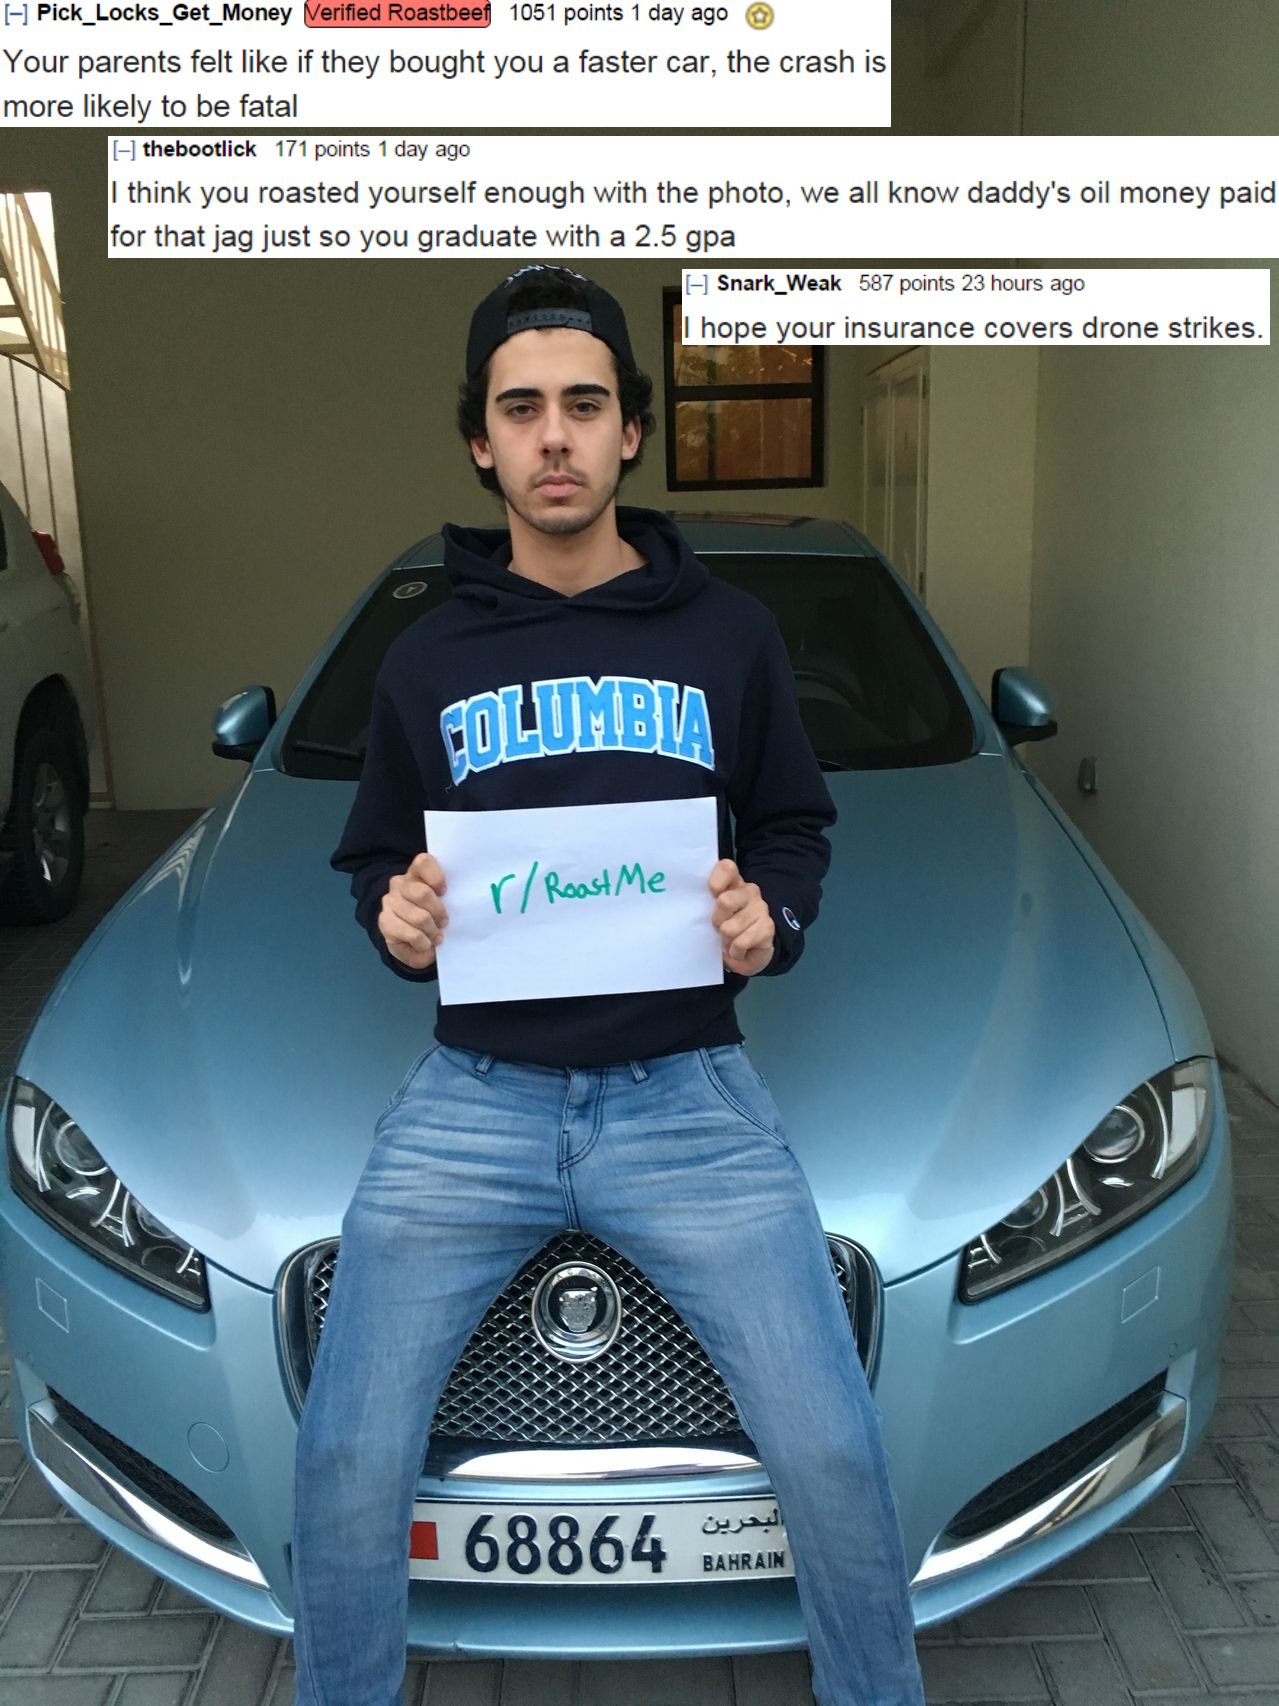 best car roasts - I Pick_Locks_Get_Money Verified Roastbeef 1051 points 1 day ago Your parents felt if they bought you a faster car, the crash is more ly to be fatal thebootlick 171 points 1 day ago I think you roasted yourself enough with the photo, we a